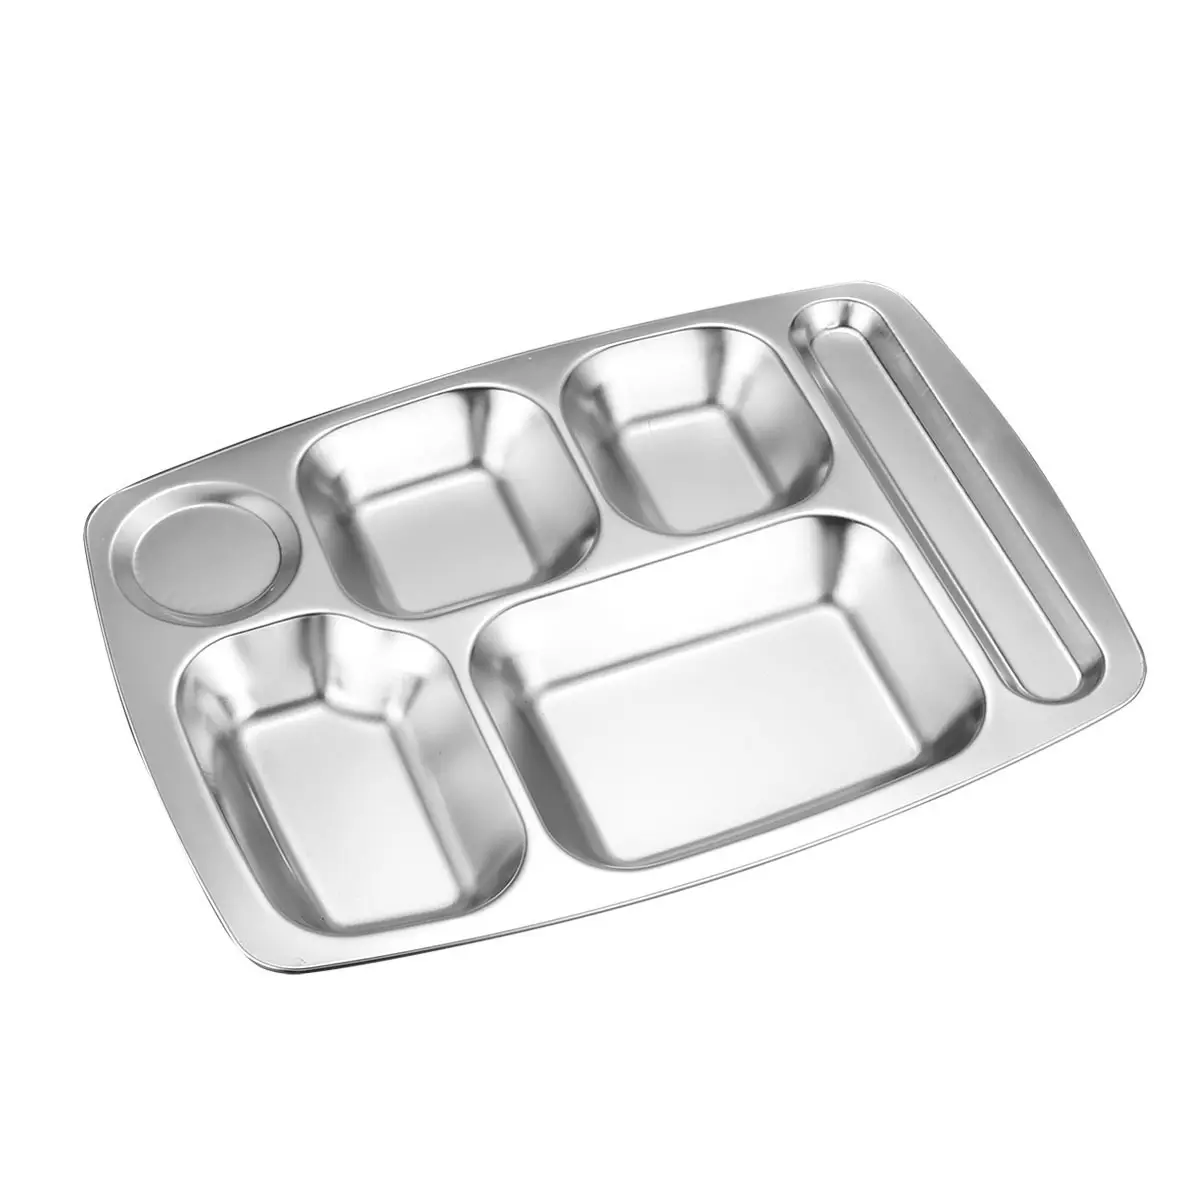 food grade high quality stainless steel 5/6 compartment school lunch tray dinner plate fast food serving tray